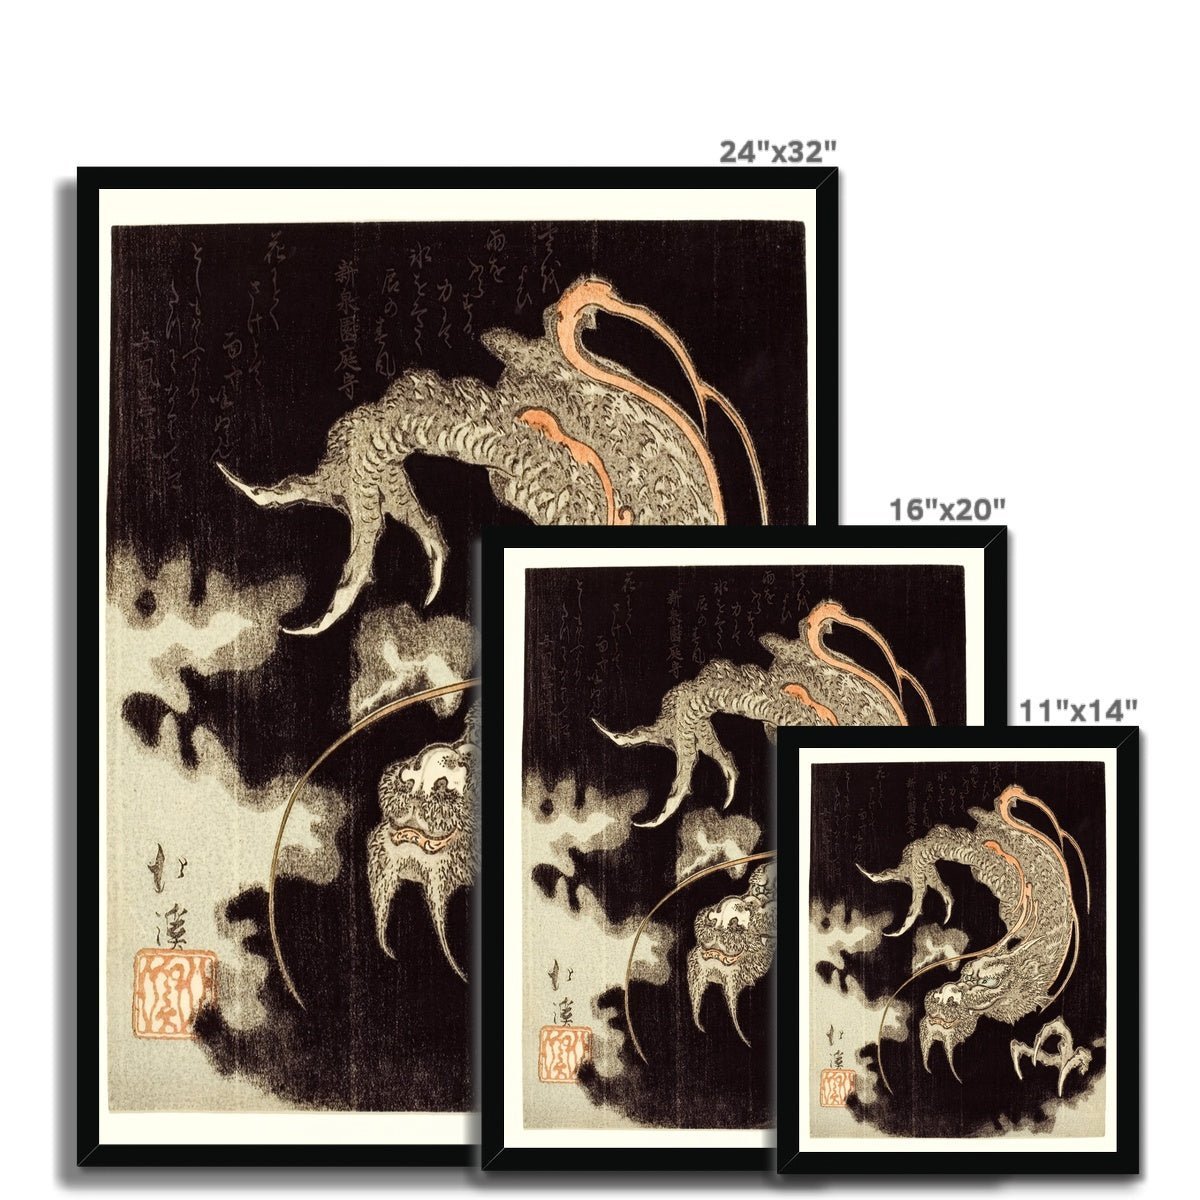 Framed Print Framed Storm Dragon Against a Black Sky with Clouds and Poems, Totoya Hokkei Japanese Framed Print